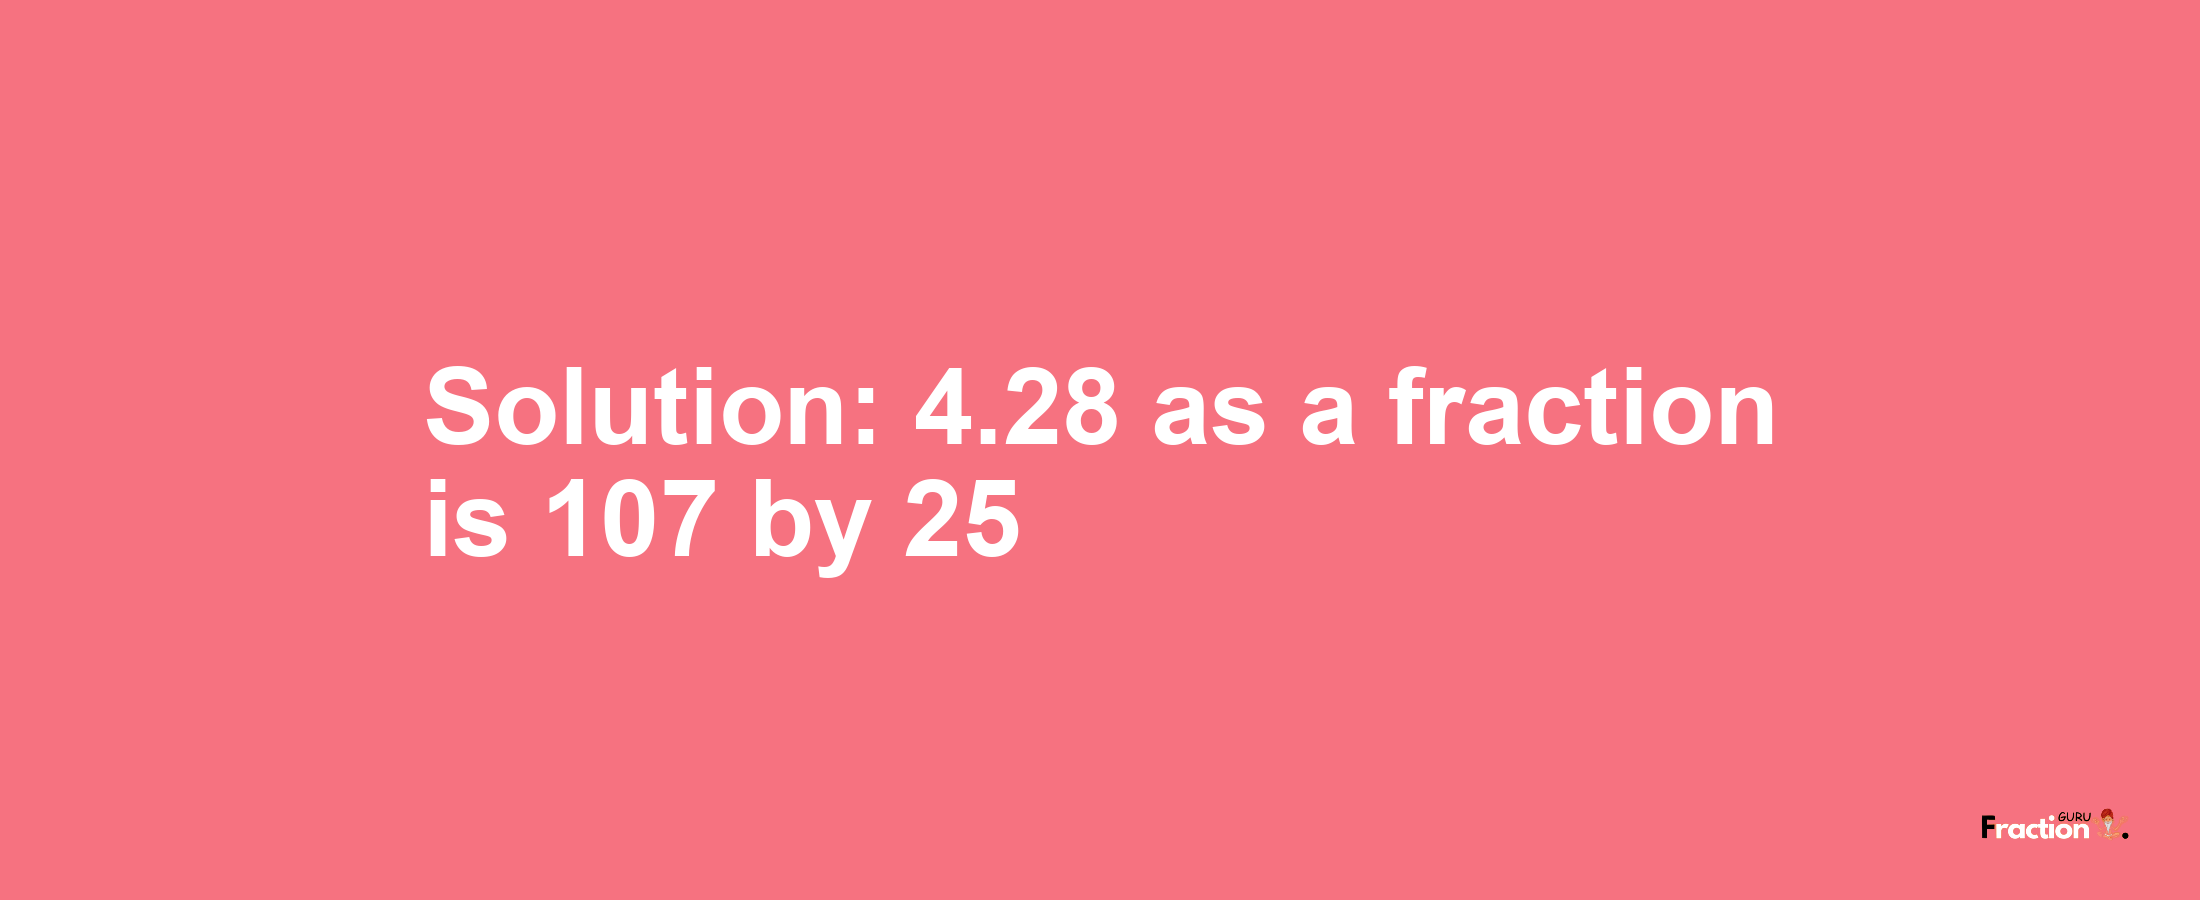 Solution:4.28 as a fraction is 107/25